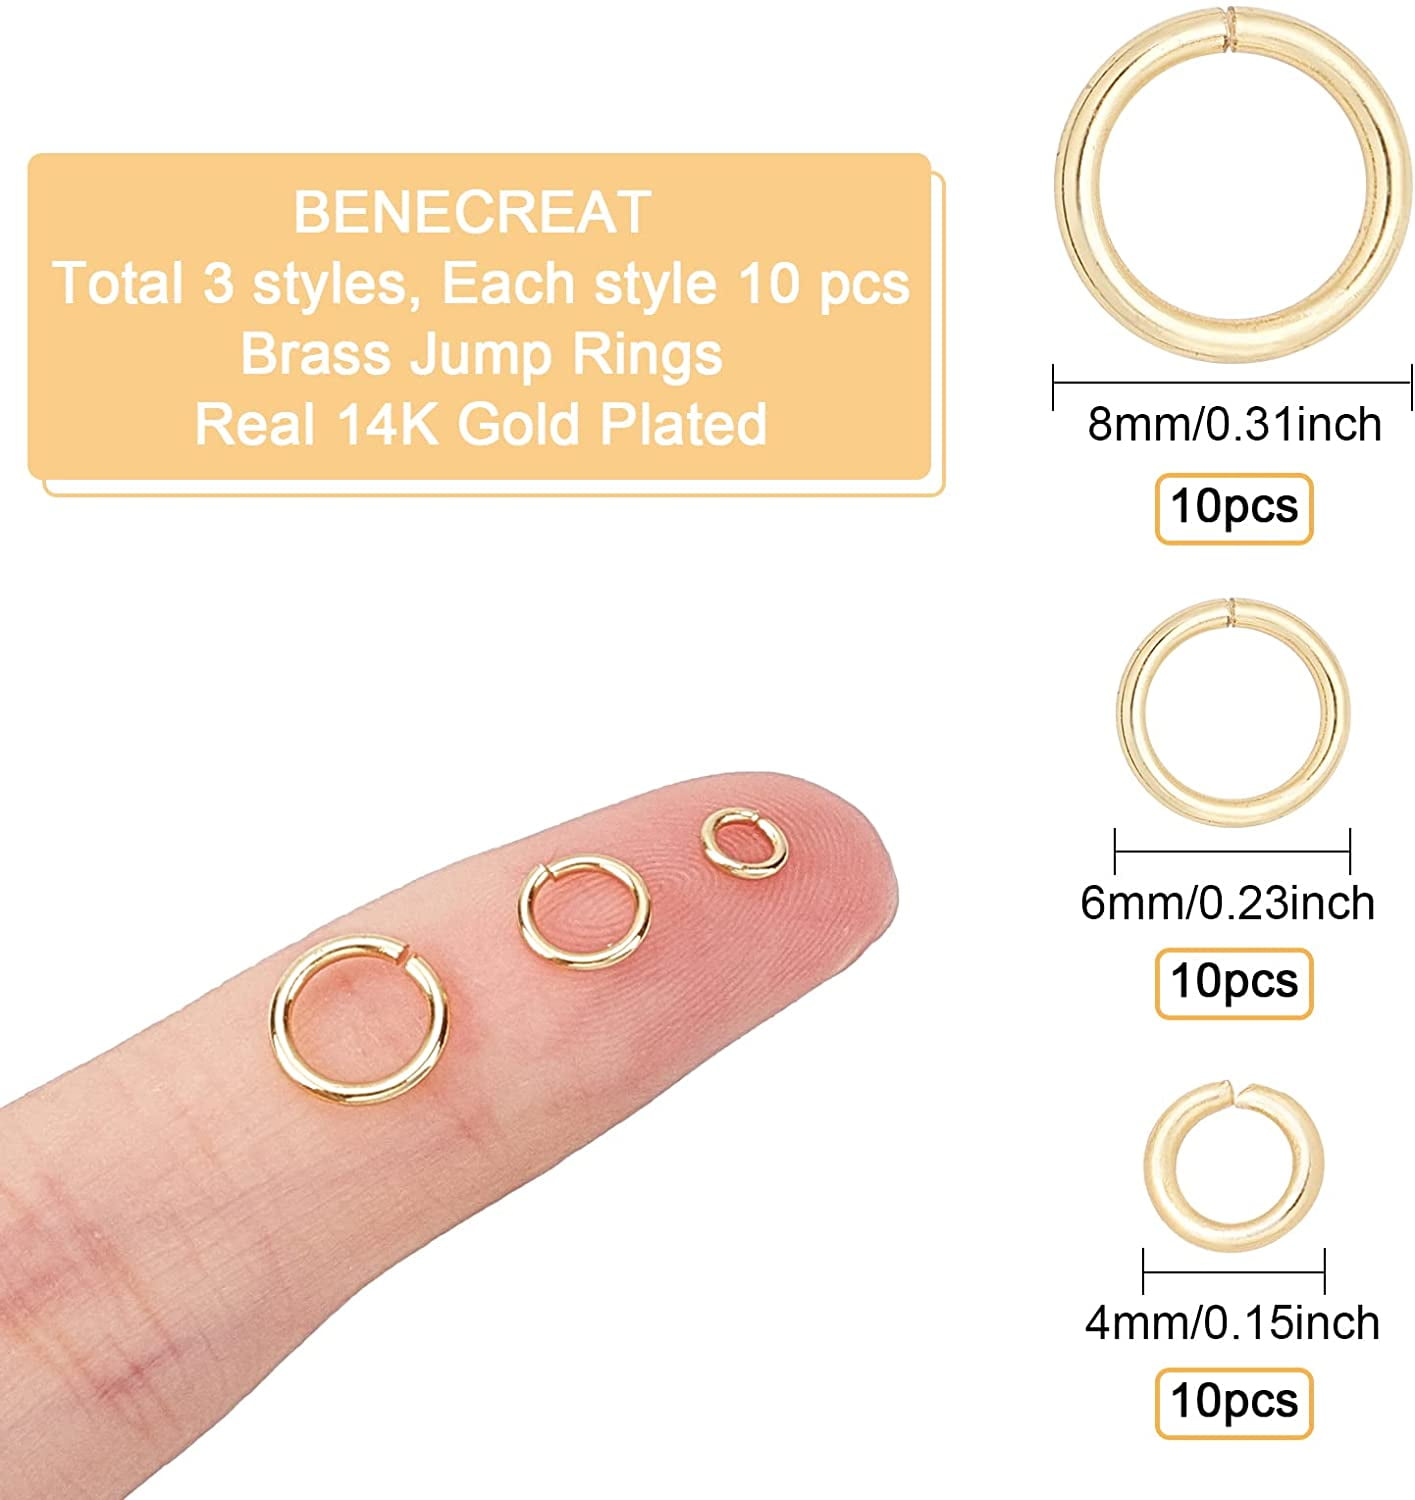 8mm Gold Plated Open Jump Rings (Approx 100 pieces) – mimi & lu